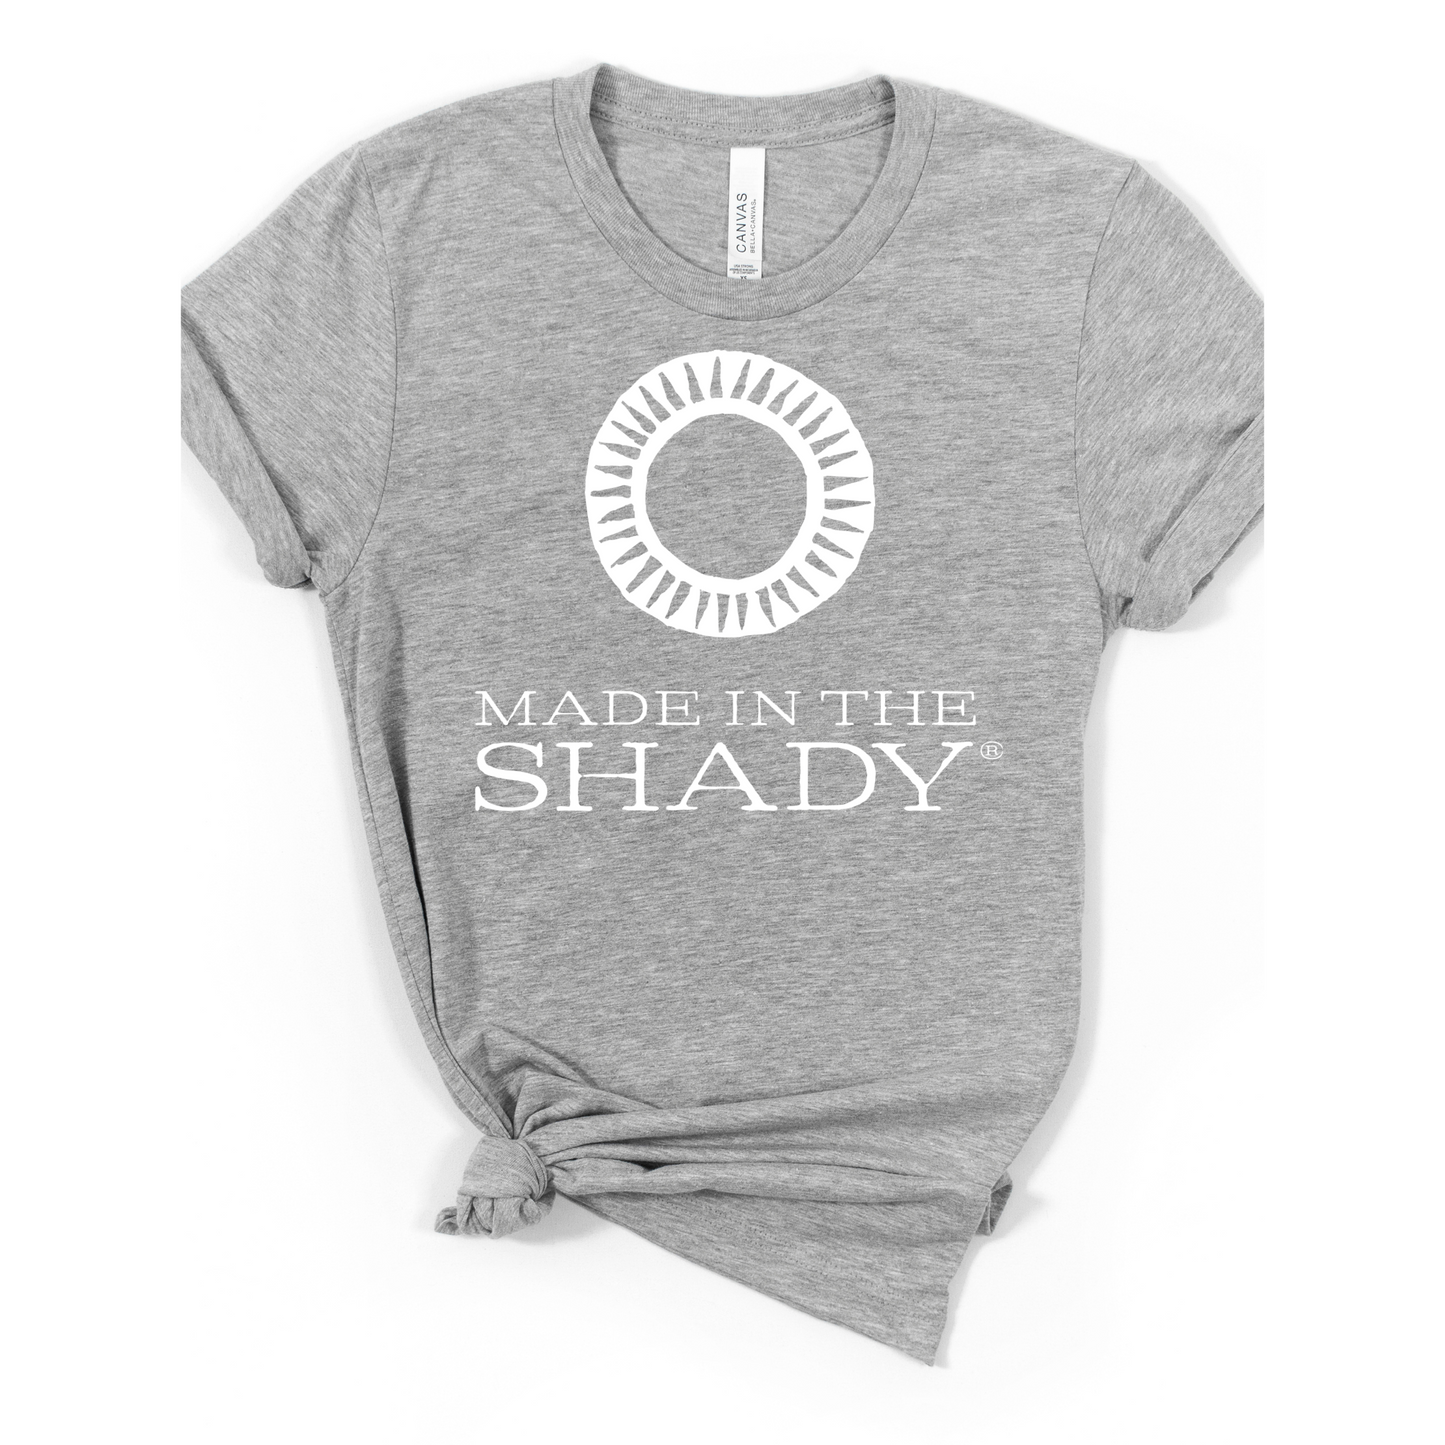 Made In The Shady T-shirt: Short Sleeve